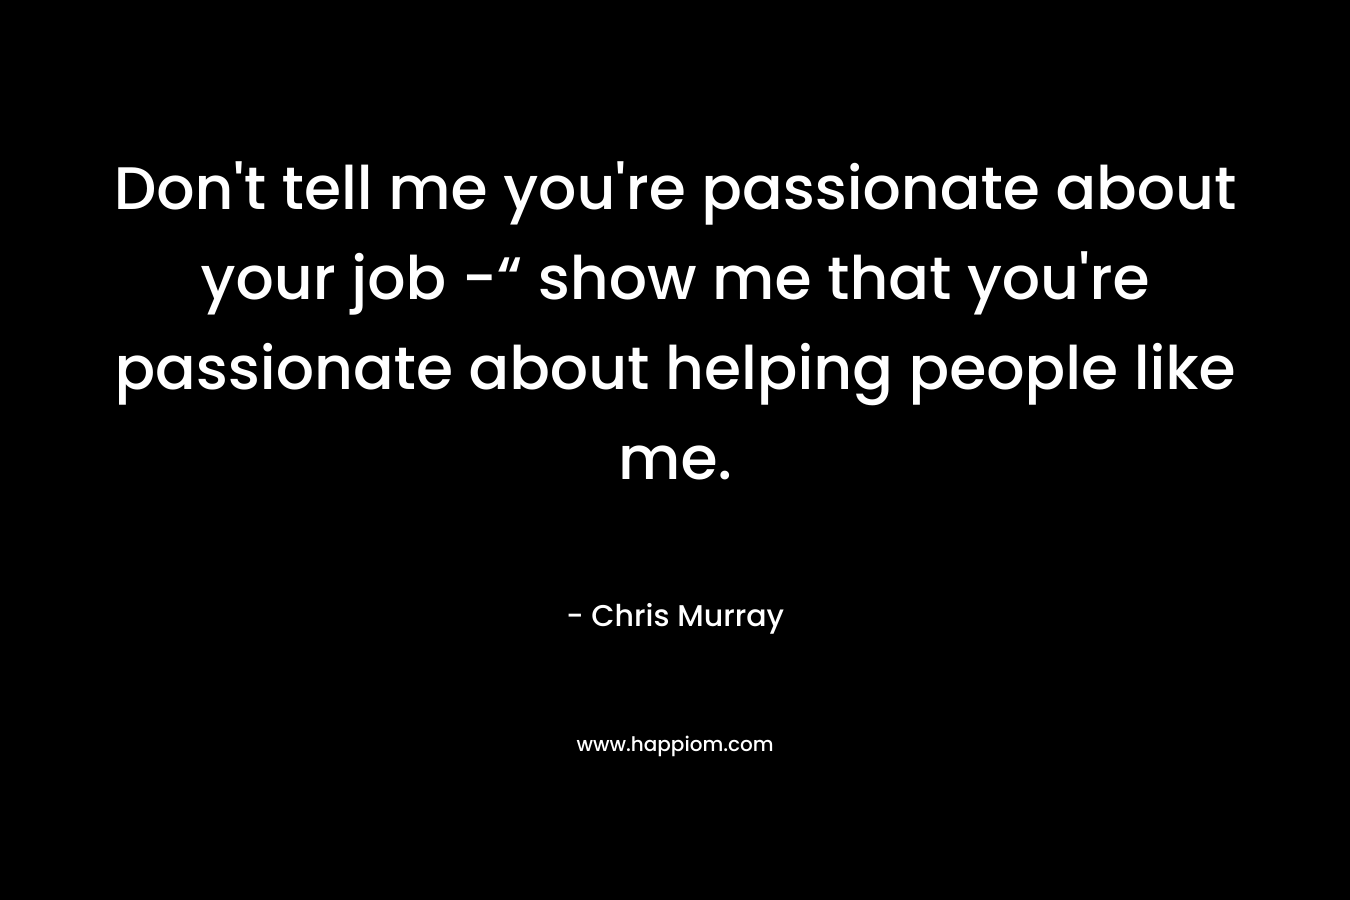 Don't tell me you're passionate about your job -“ show me that you're passionate about helping people like me.